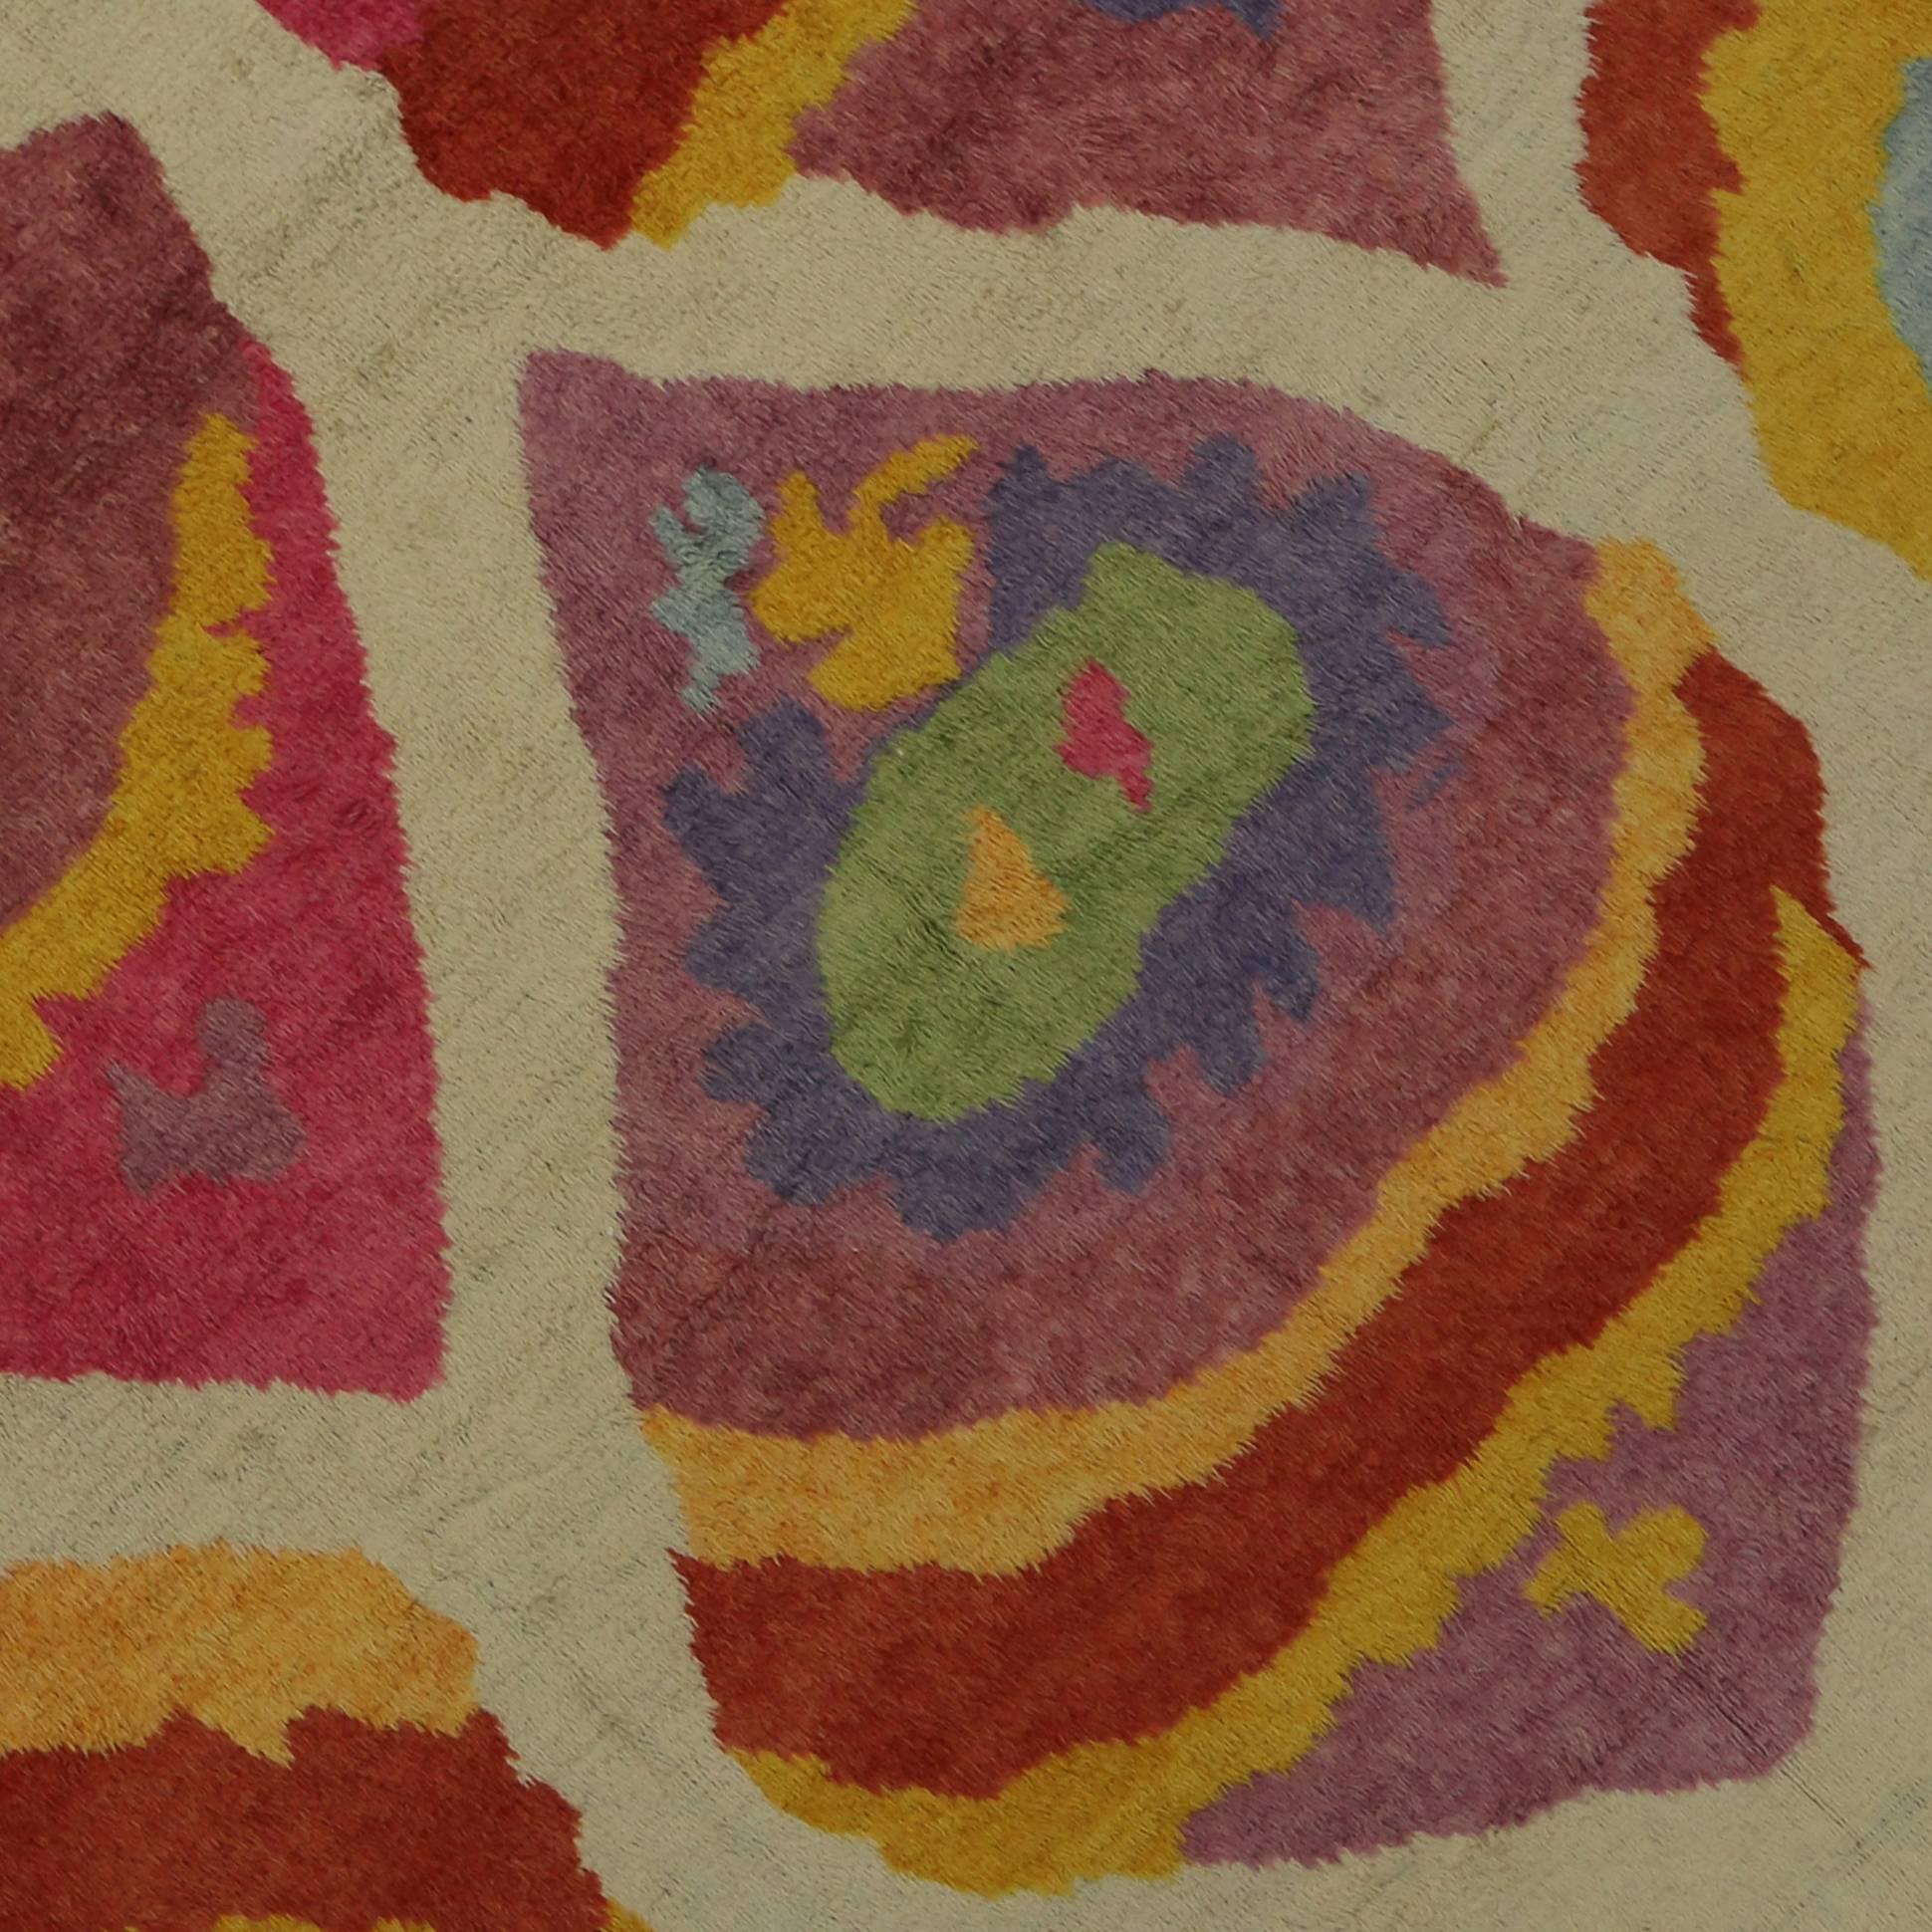 Turkish New Colorful Contemporary Tulu Shag Area Rug Inspired by Robert Delaunay